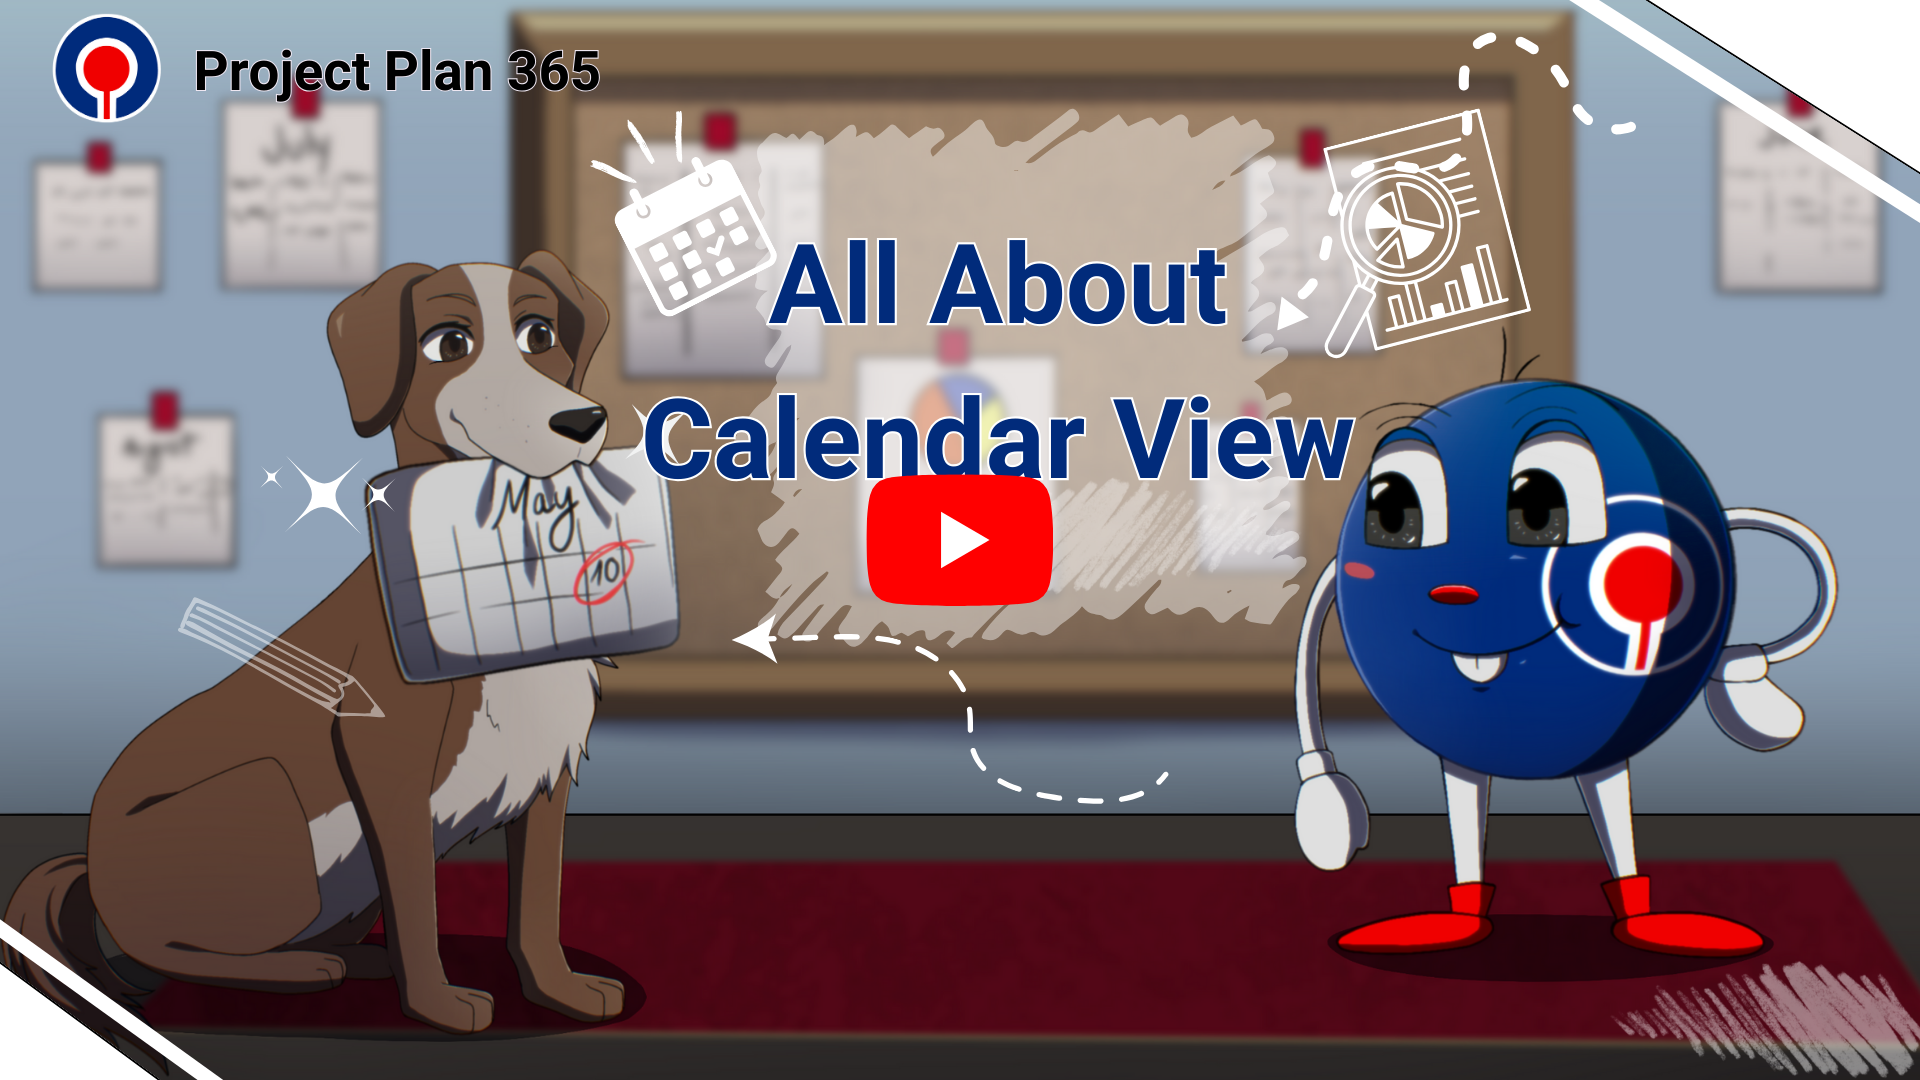 All About Calendar View